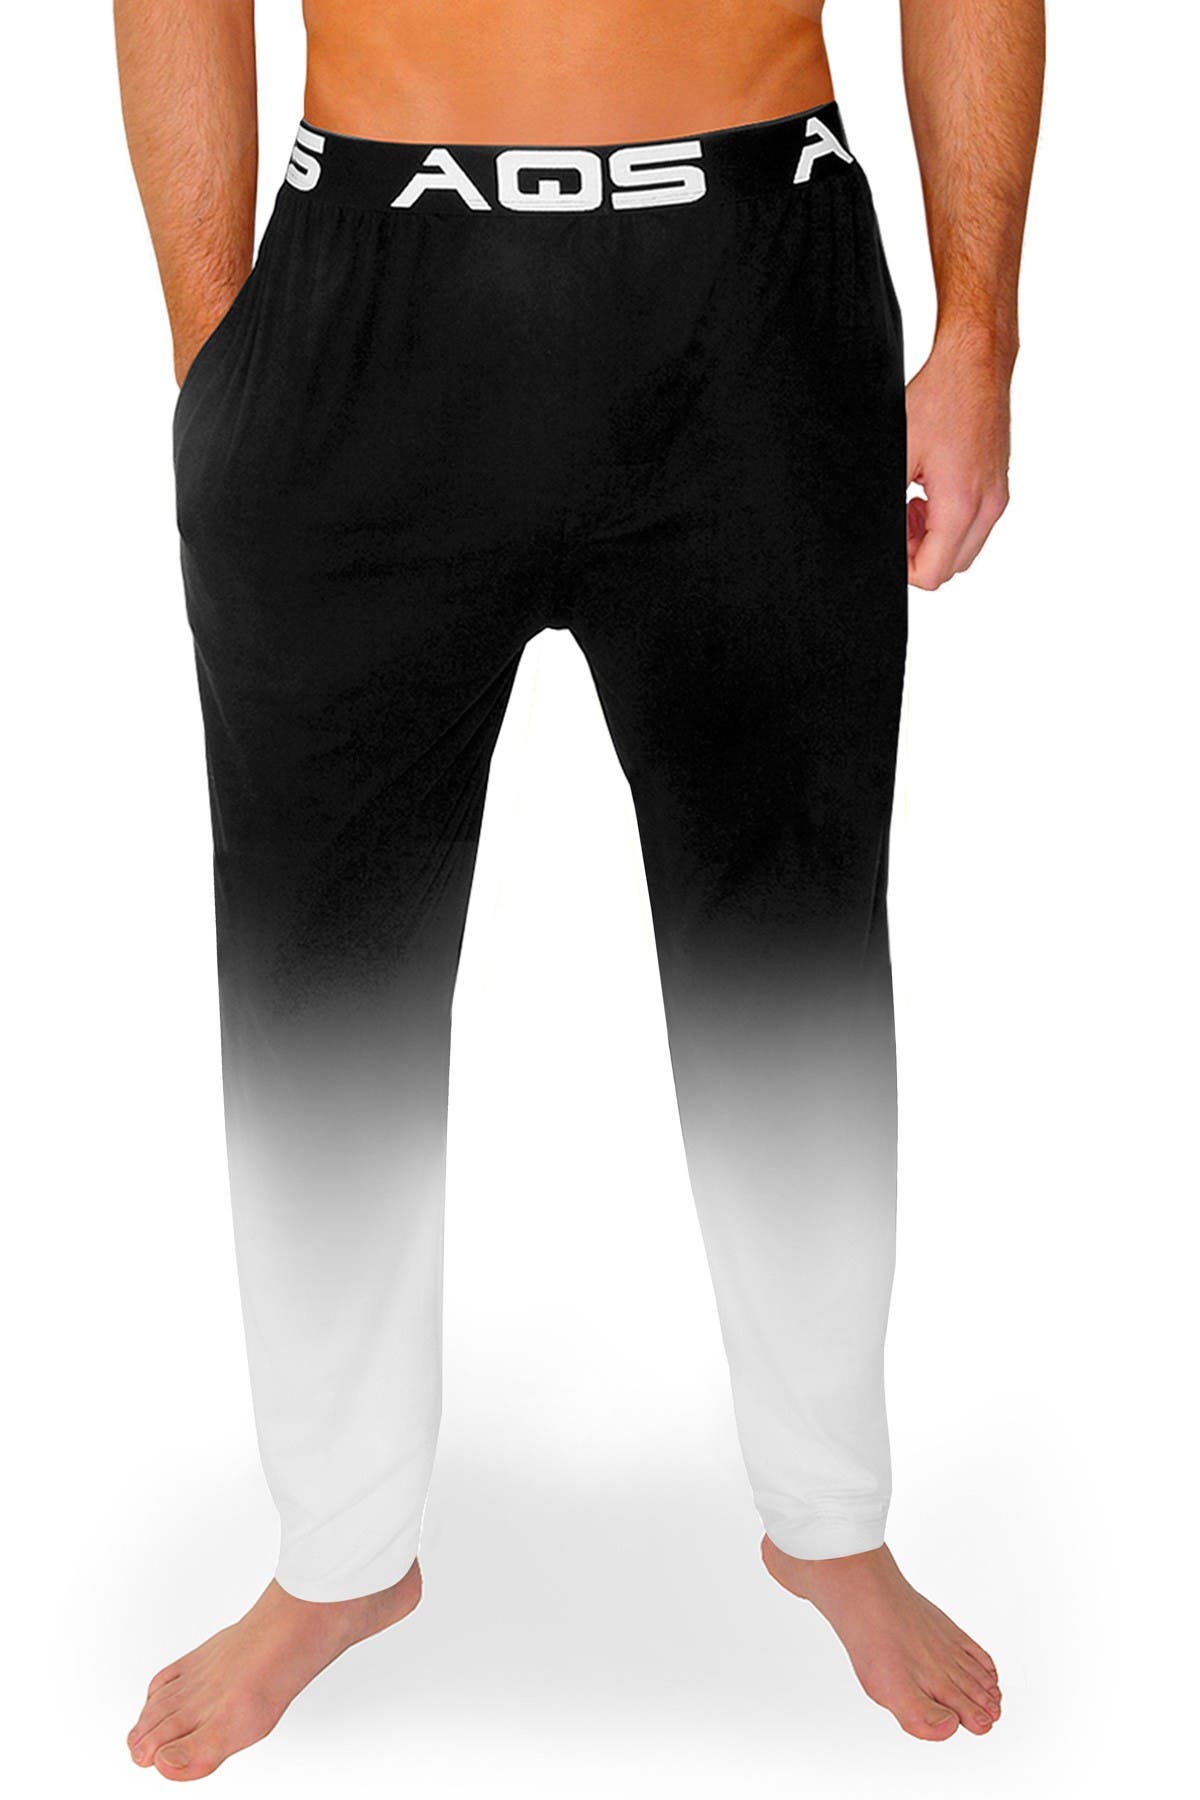 Aqs Ombre Lounge Pants In Black/white Ombre